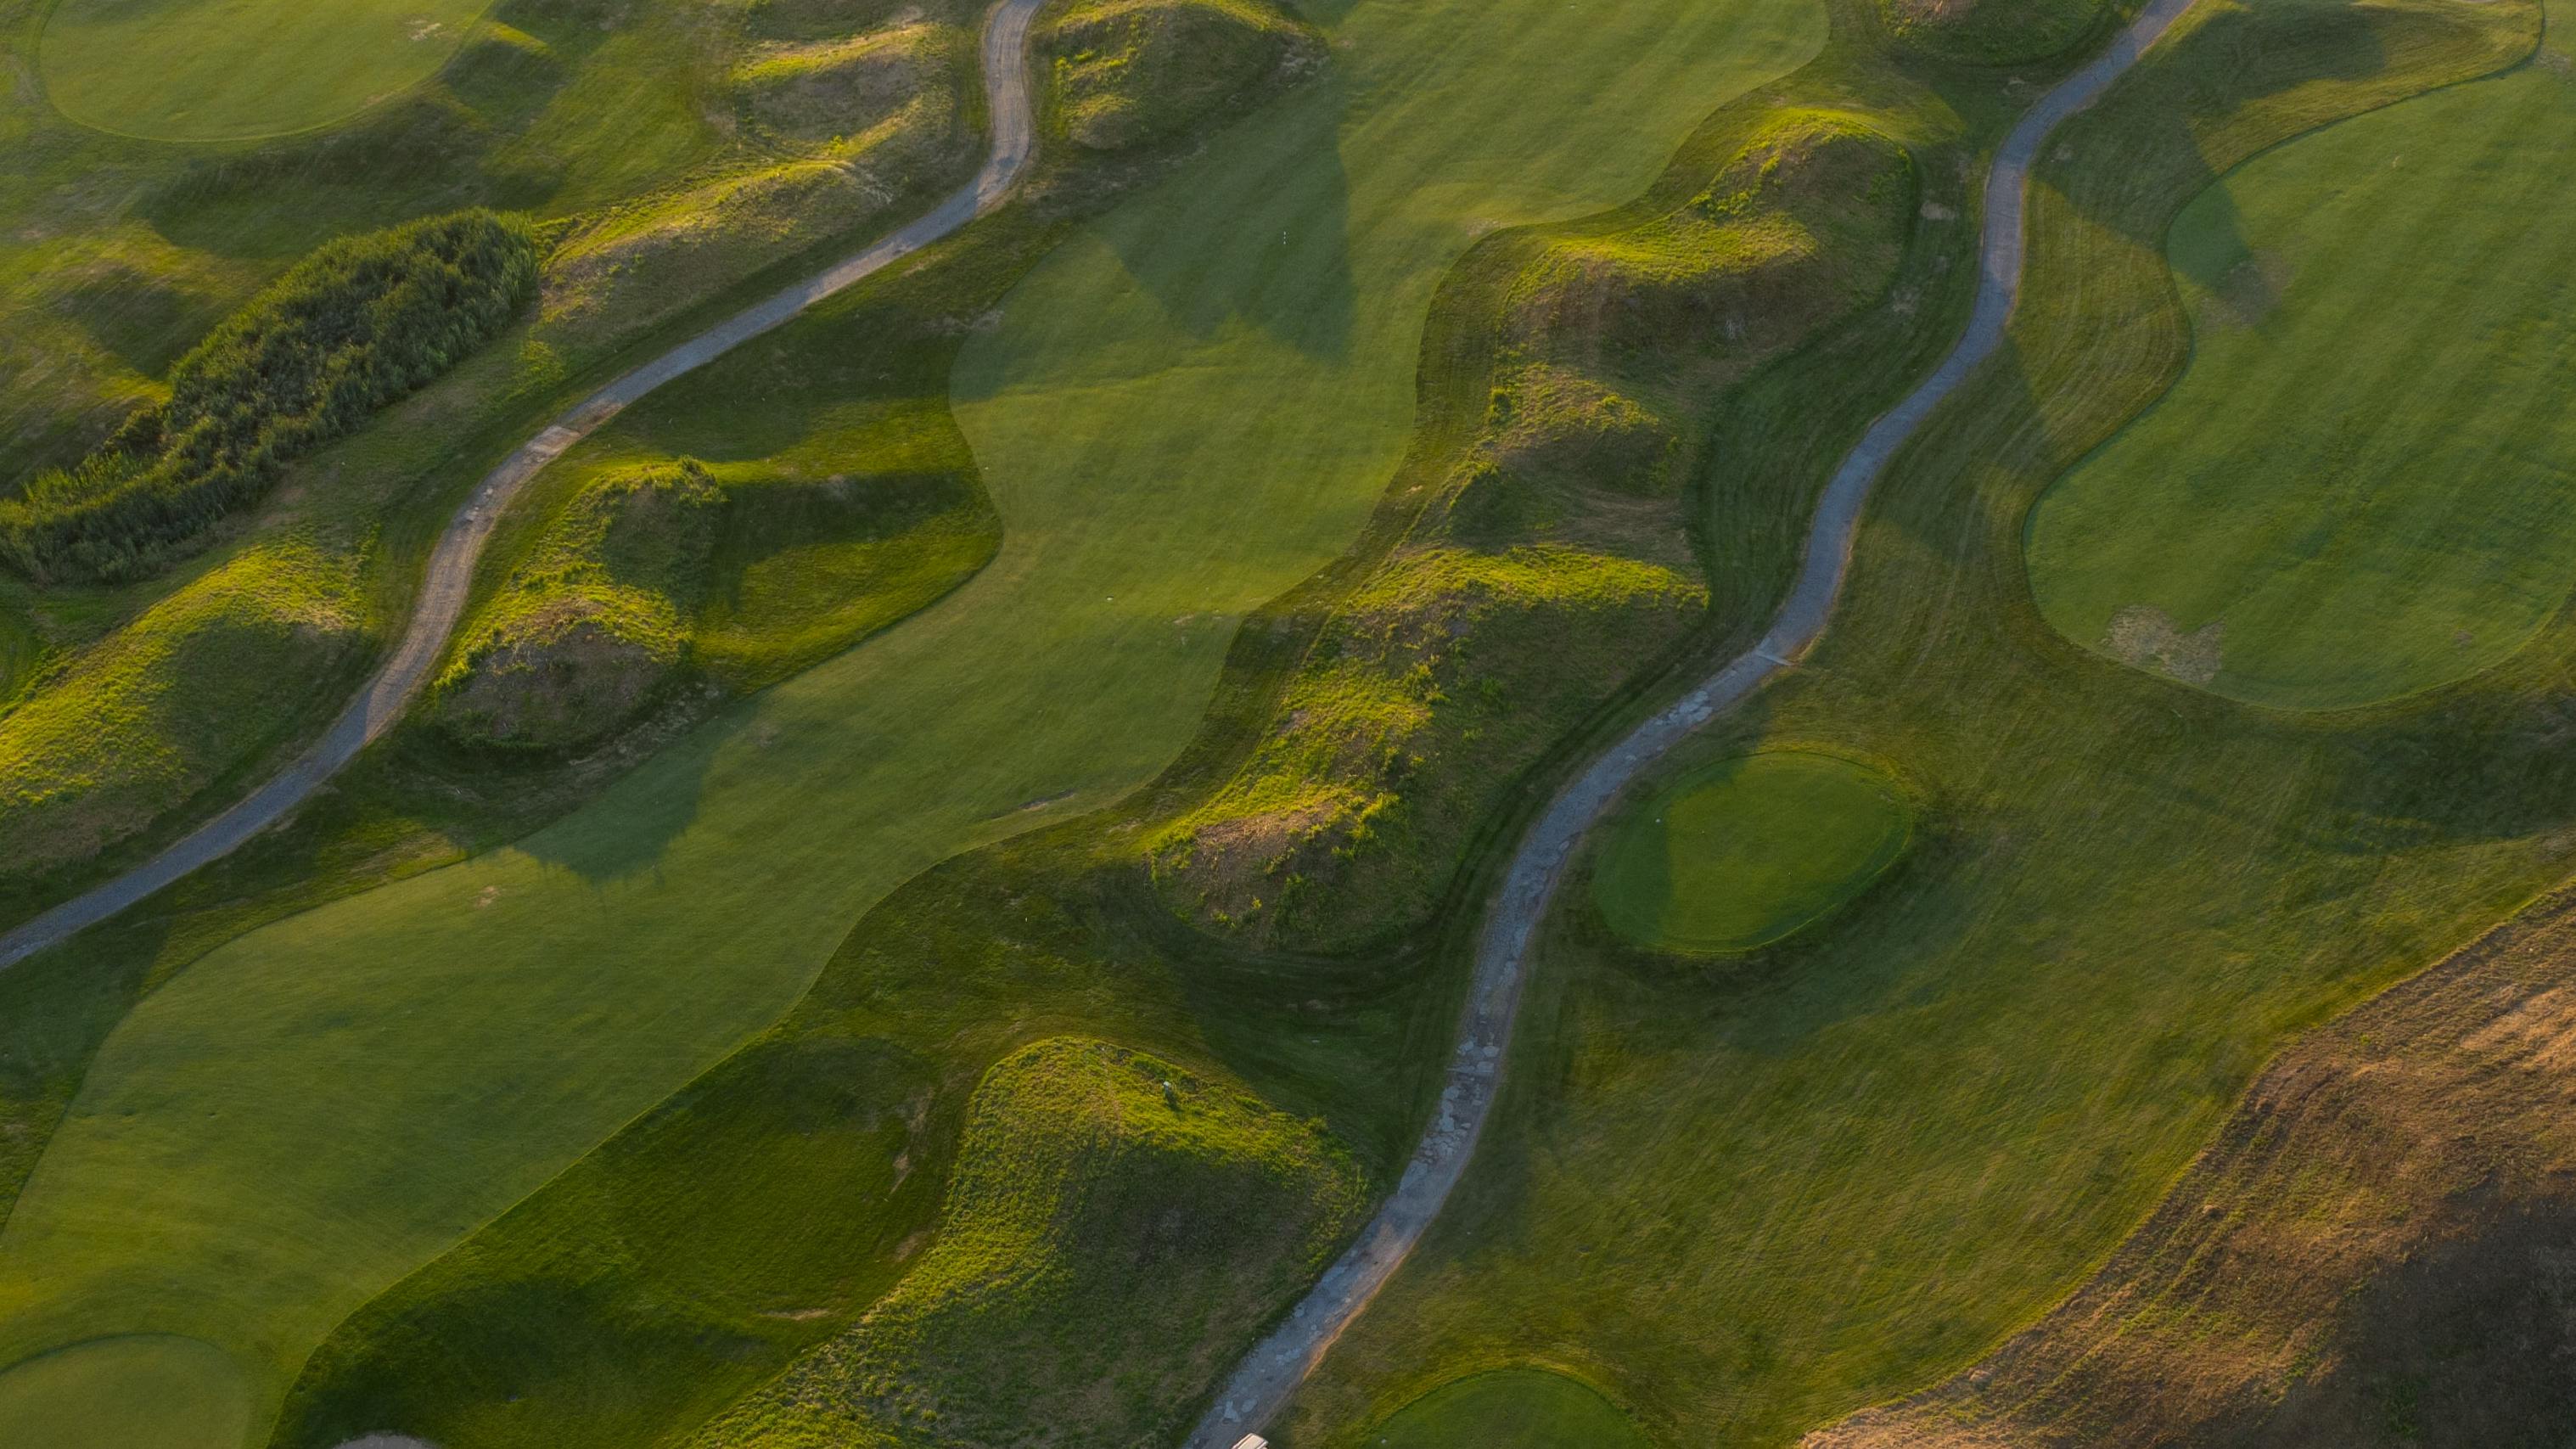 Sky view of a golf course where you can see many fairways, greens, and golf cart trails. 